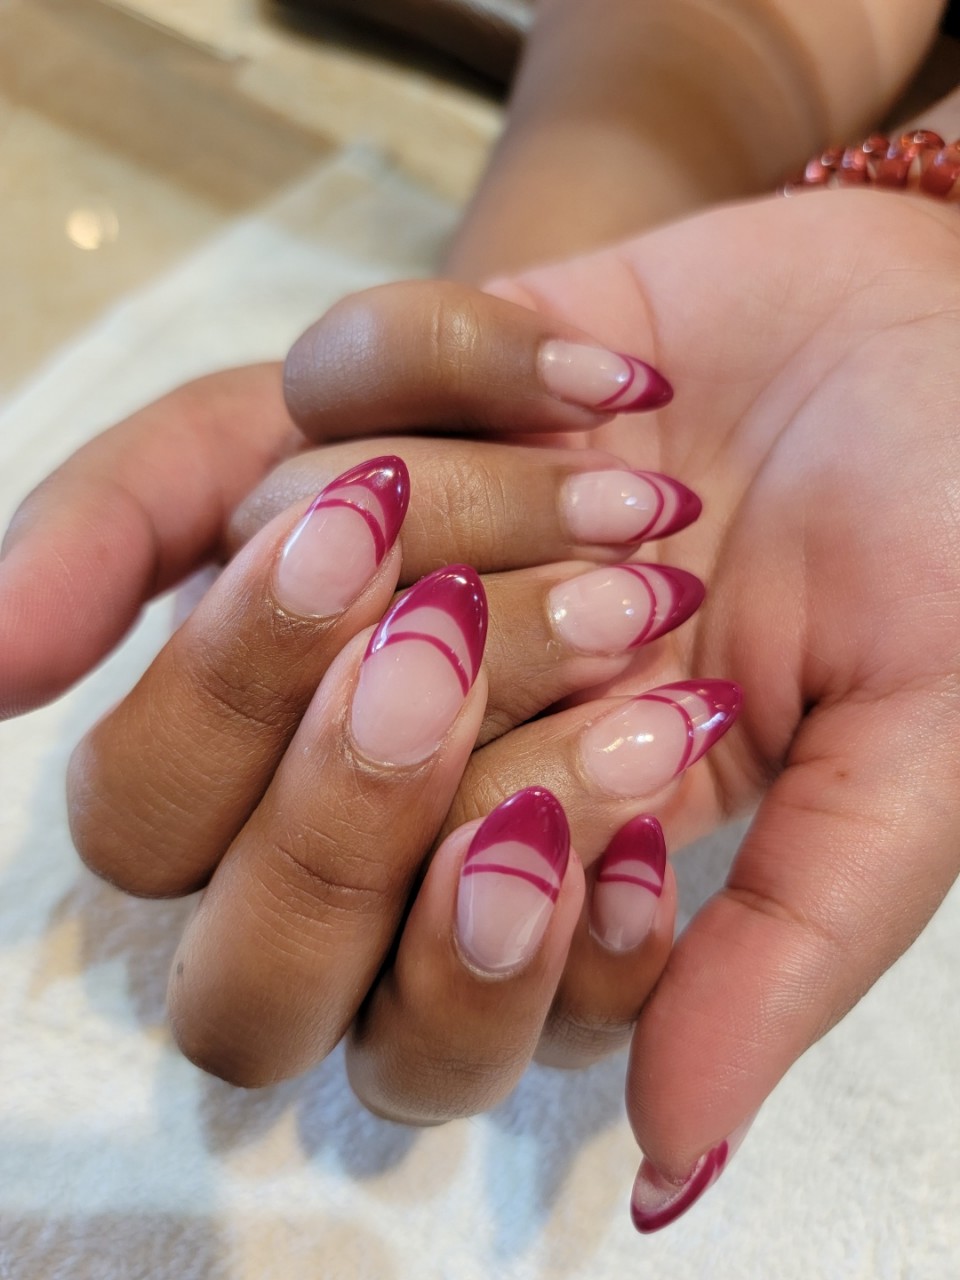 Lees French Nails | 3 Paterson Ave, Little Falls, NJ 07424 | Phone: (973) 256-5995